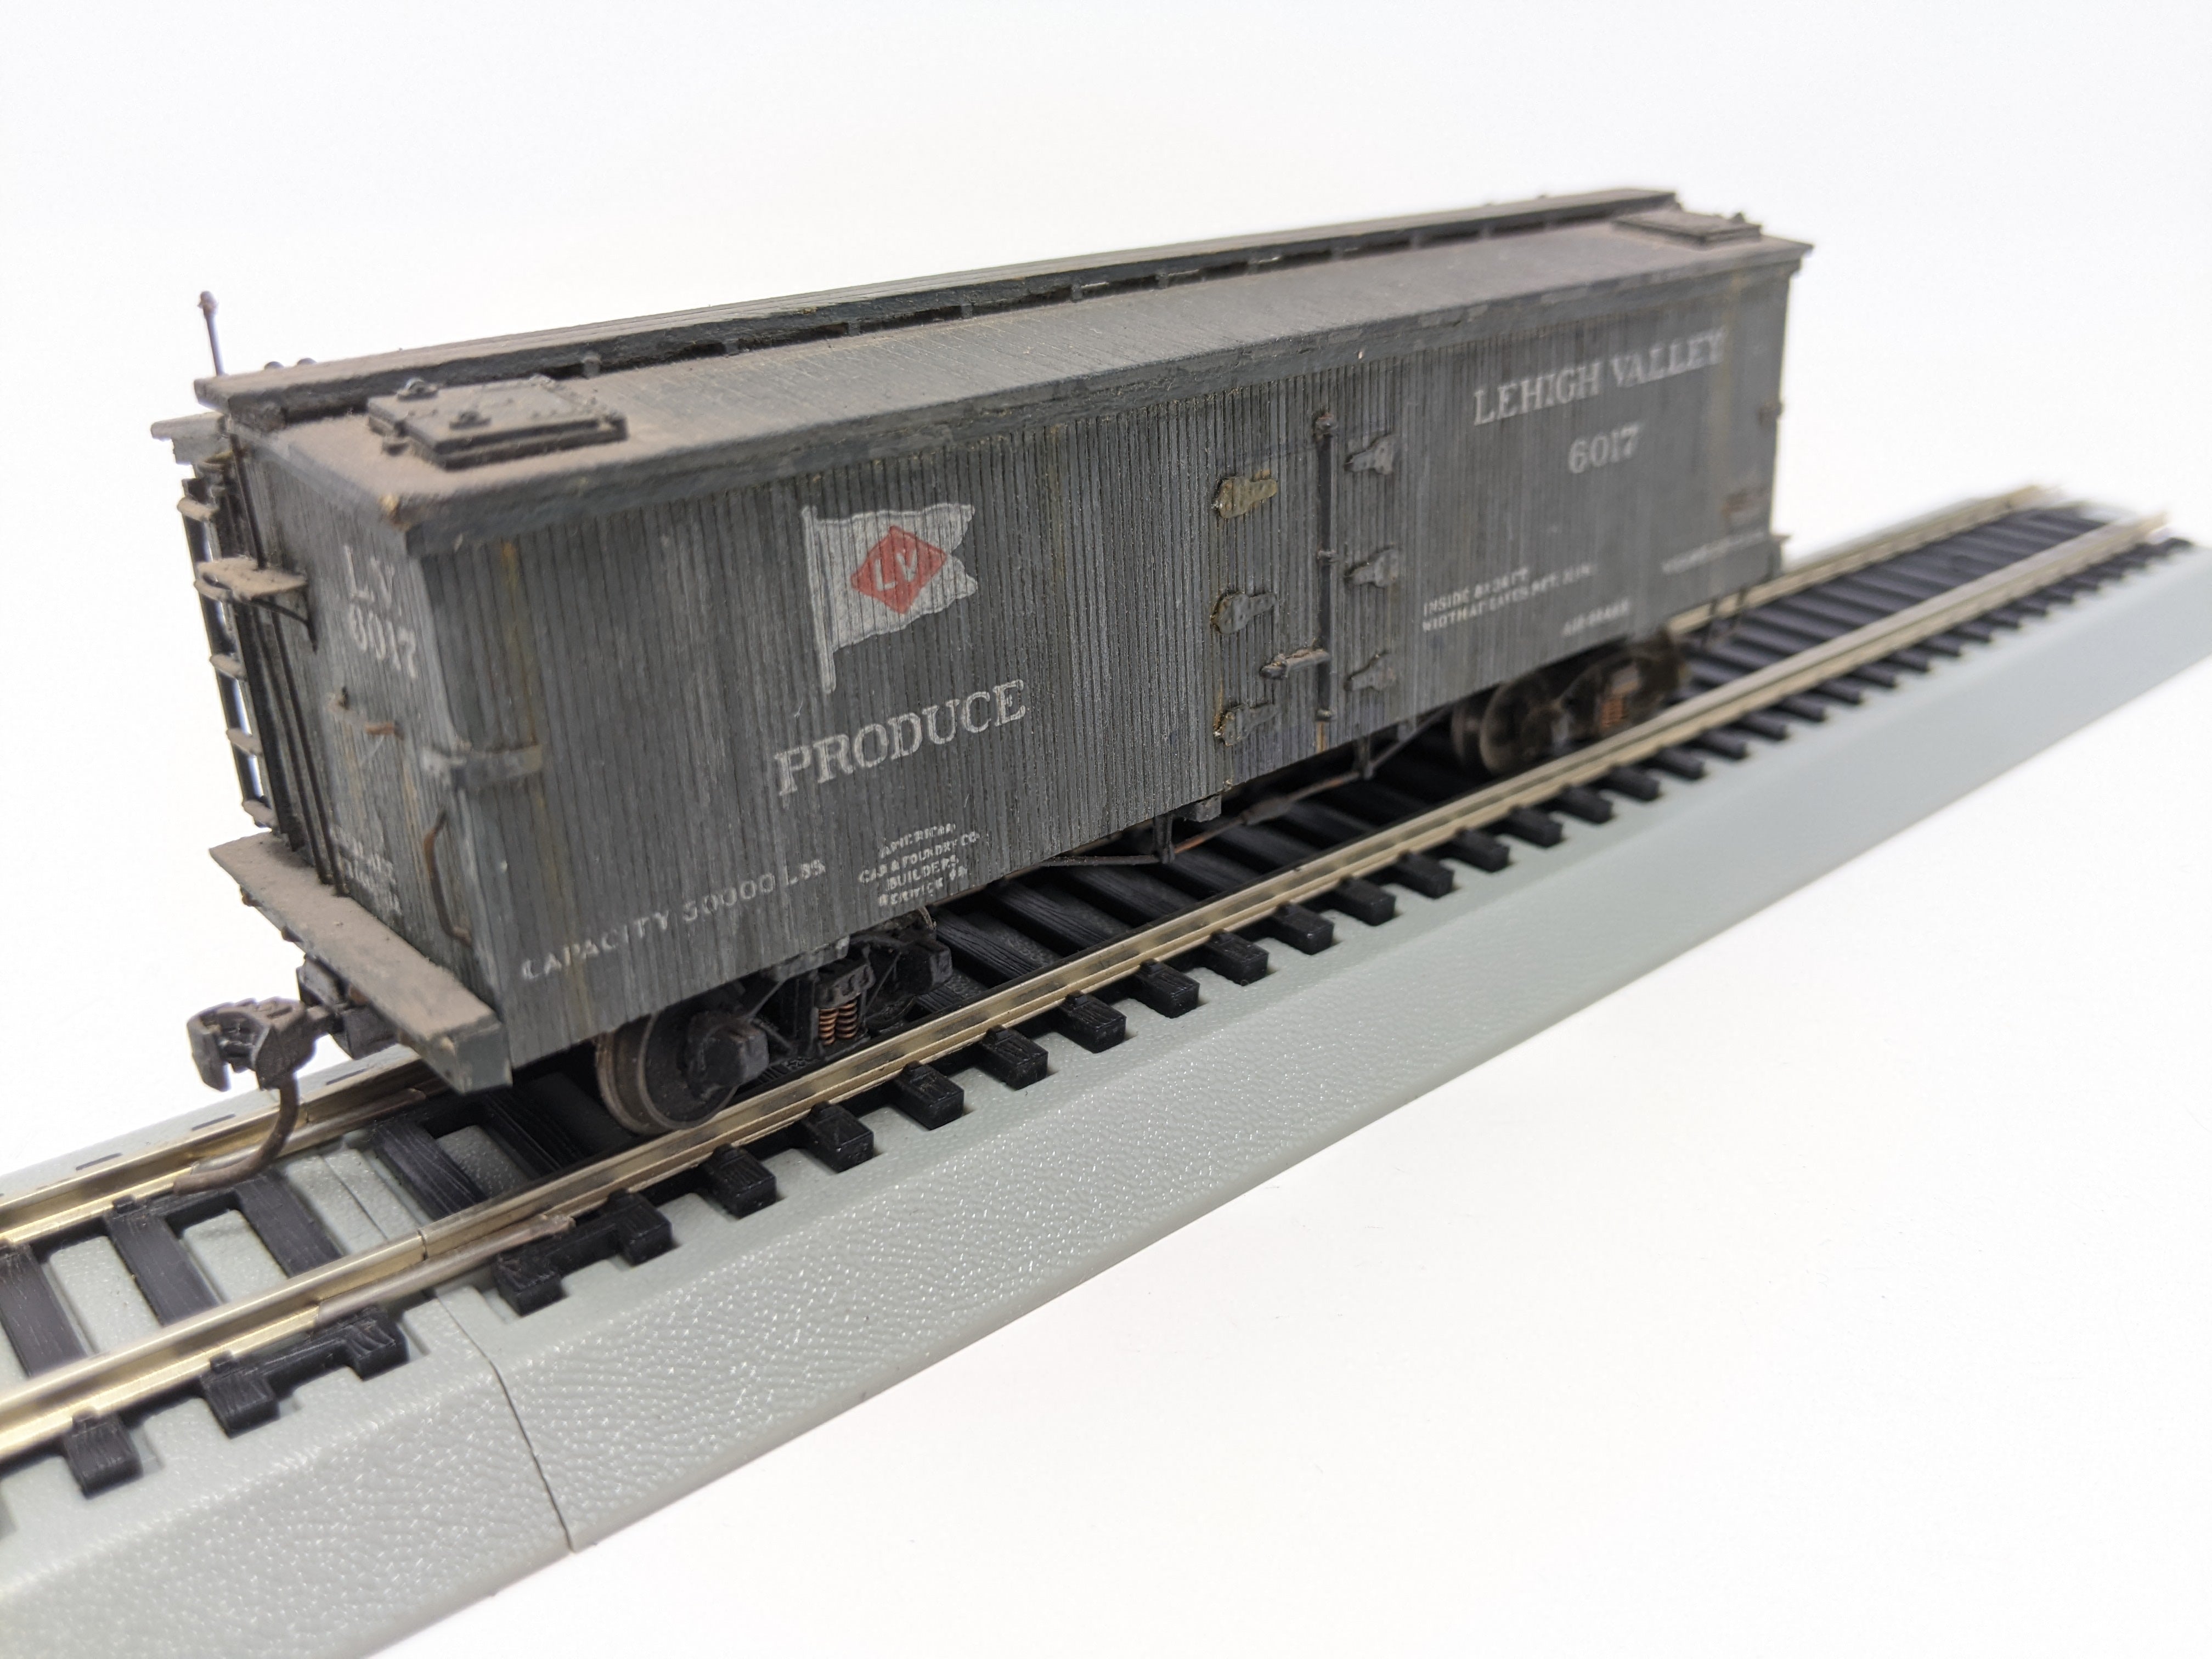 USED HO Scale, Oldtime 35' Wooden Reefer, Lehigh Valley #6017, Read Description